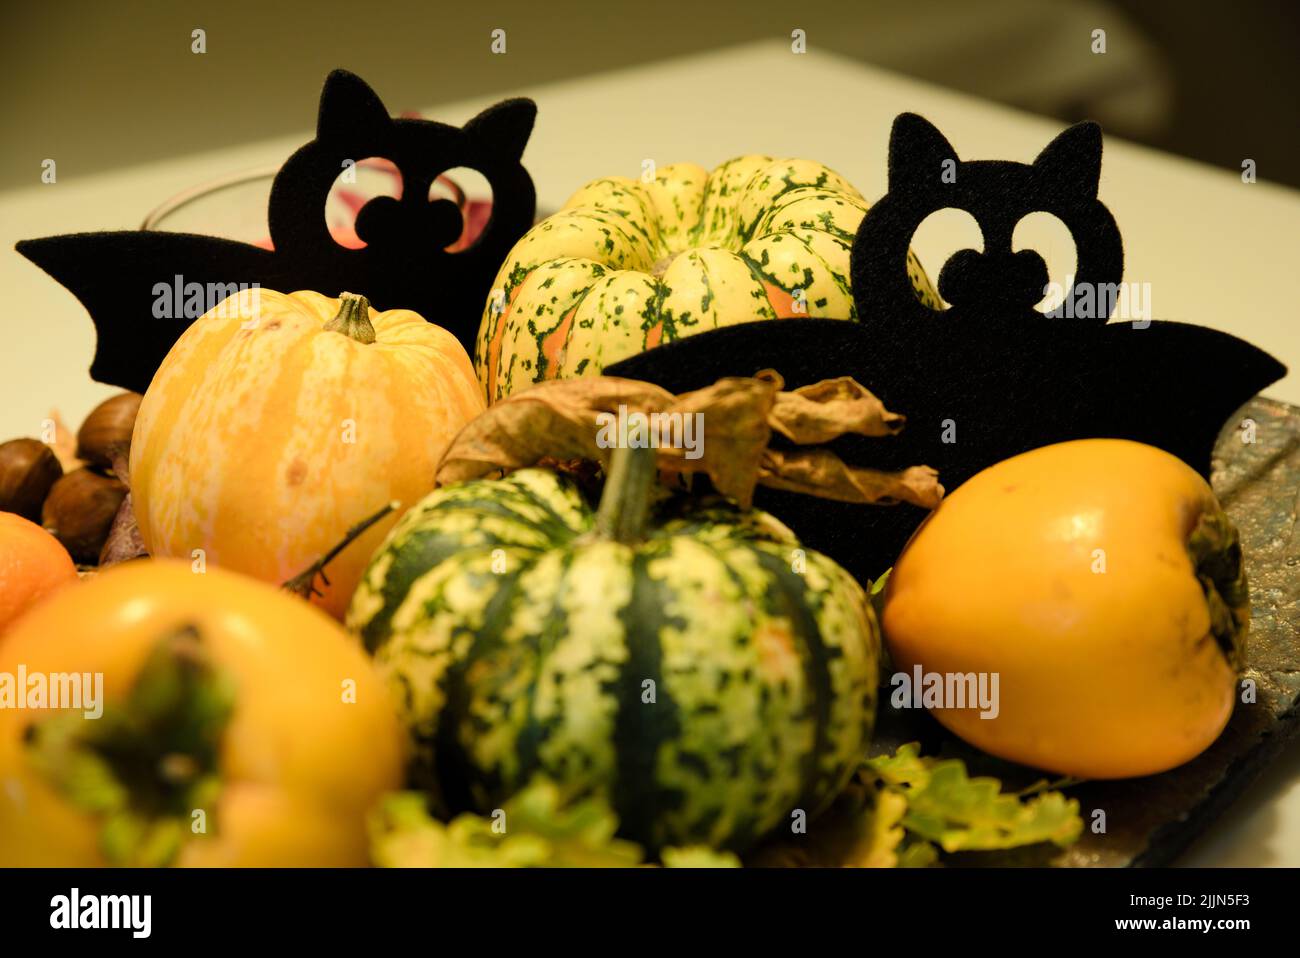 A closeup shot of yellow and green pumpkins with an image of bats in the background Stock Photo